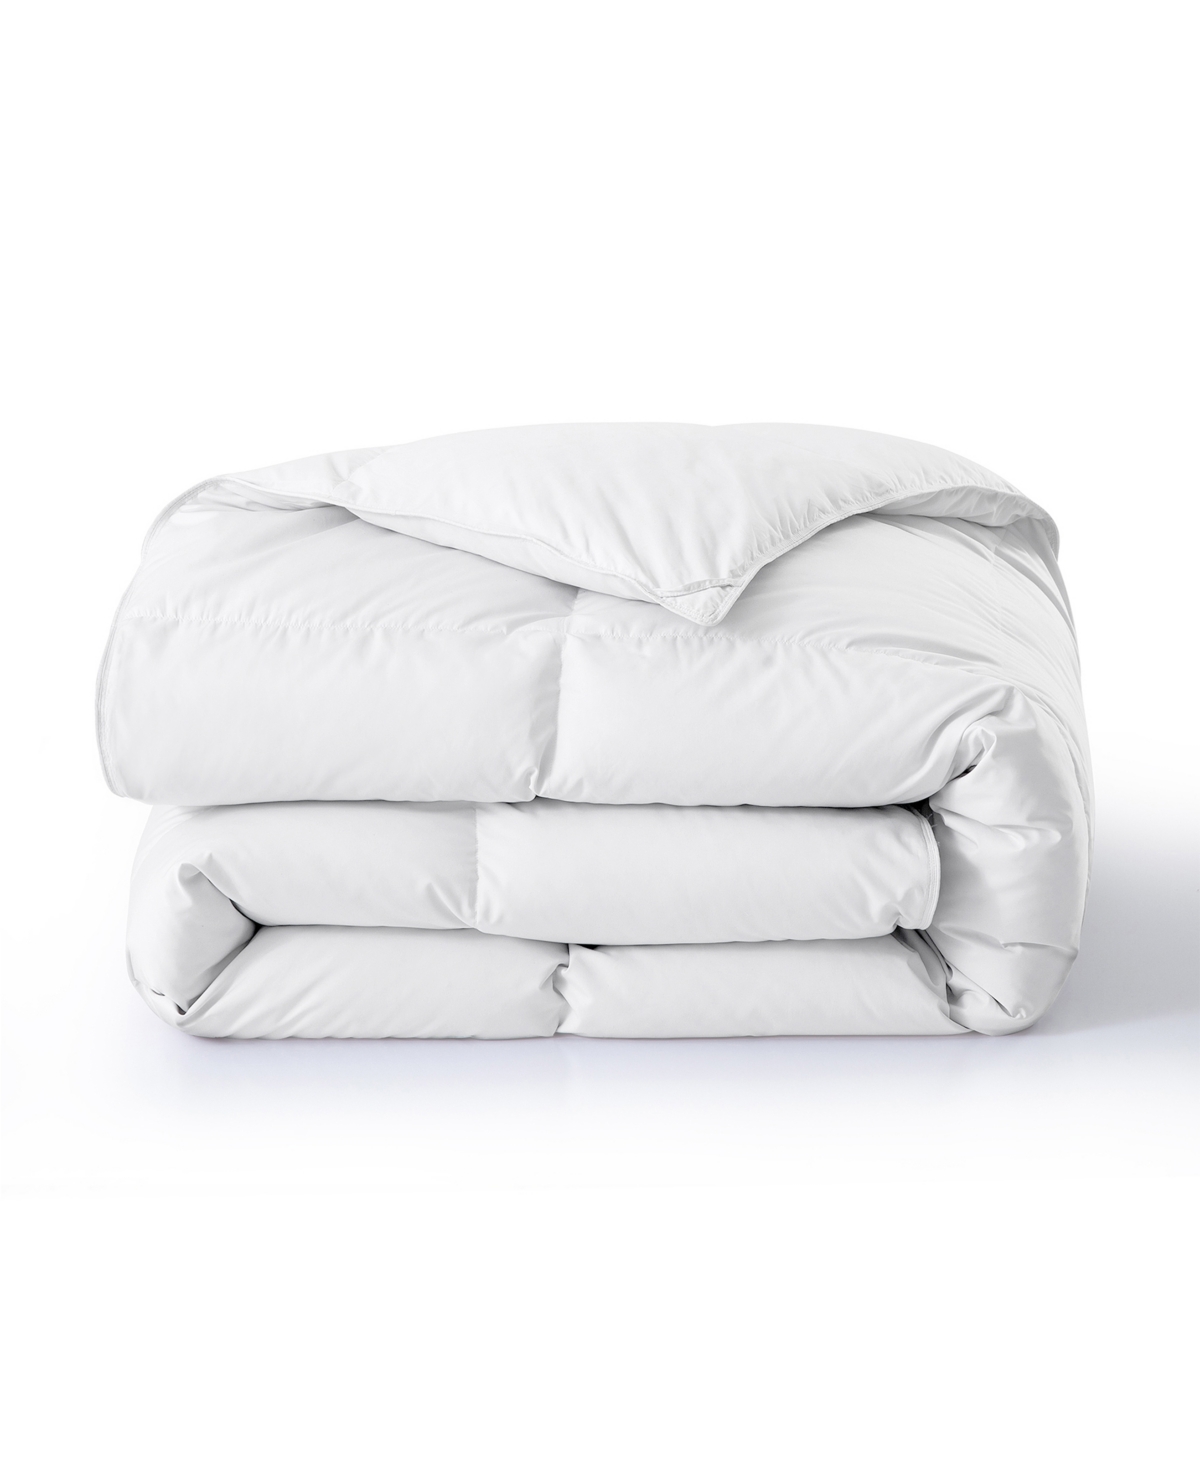 Unikome All Season 360 Thread Count Extra Soft Goose Down And Feather Fiber Comforter, Full/queen In White